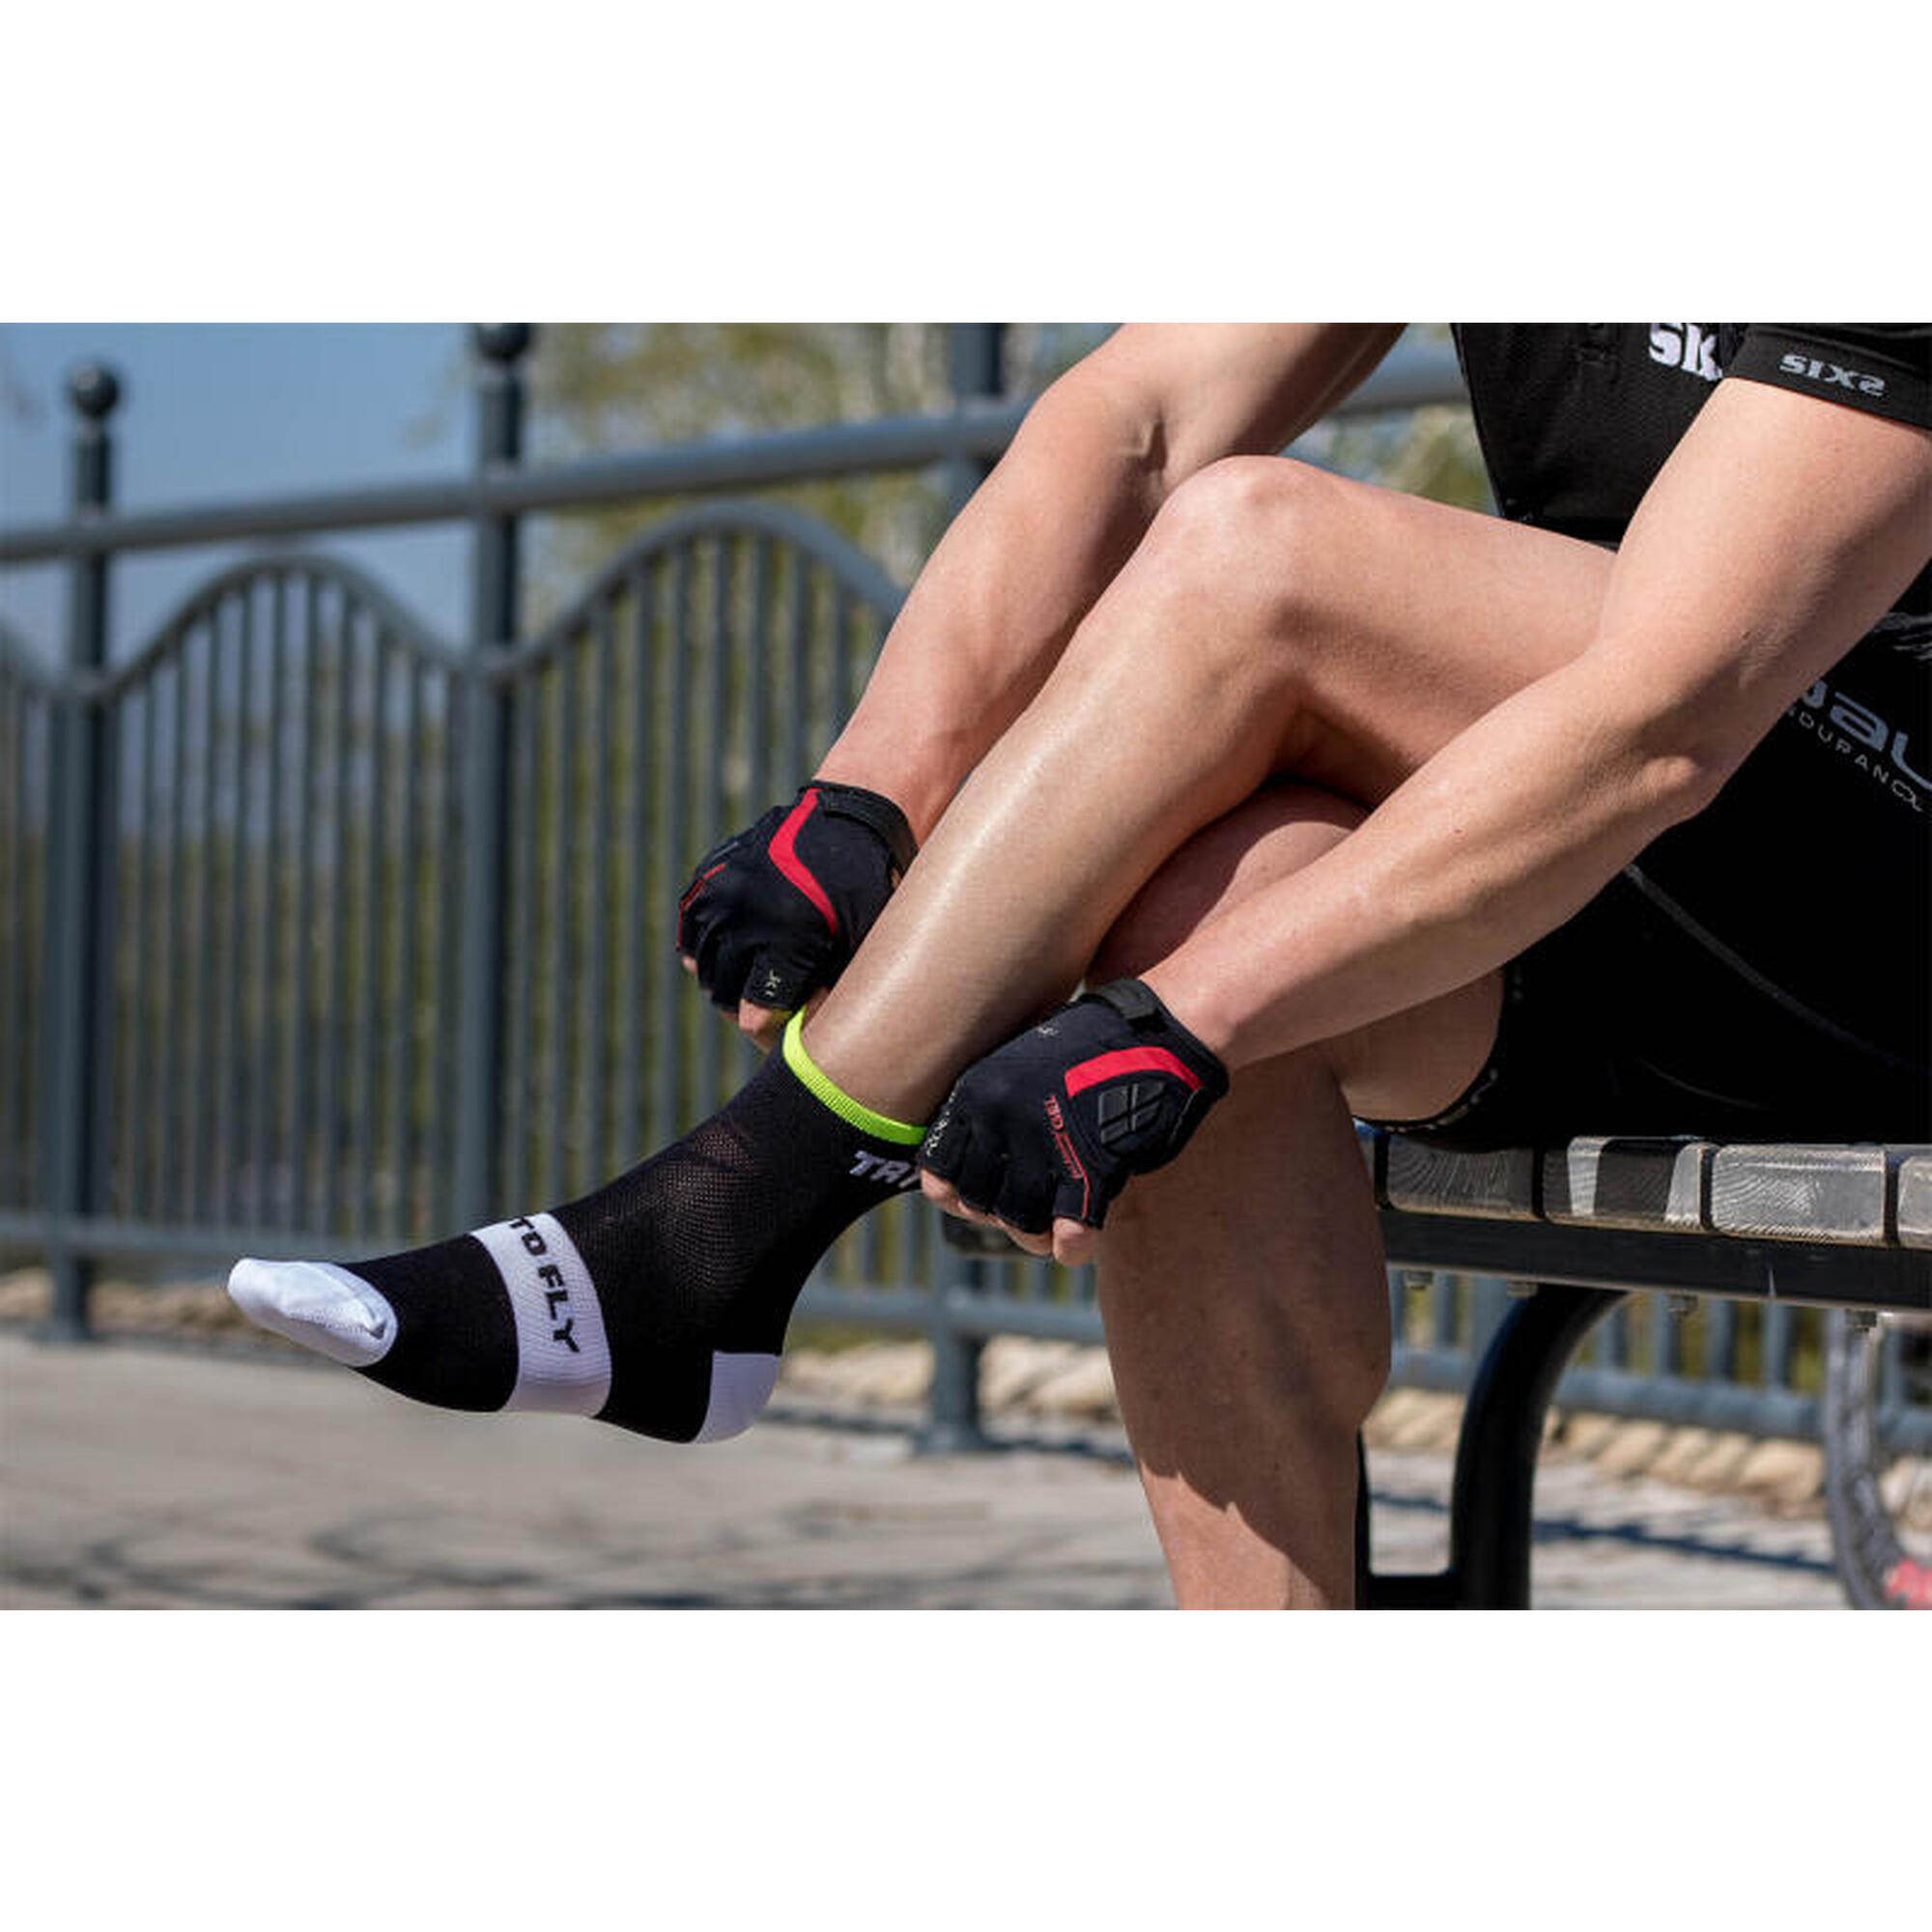 Sosete scurte ciclism CYCLING ANKLE SOCKS Meryl® Skinlife Black-White, 35-38